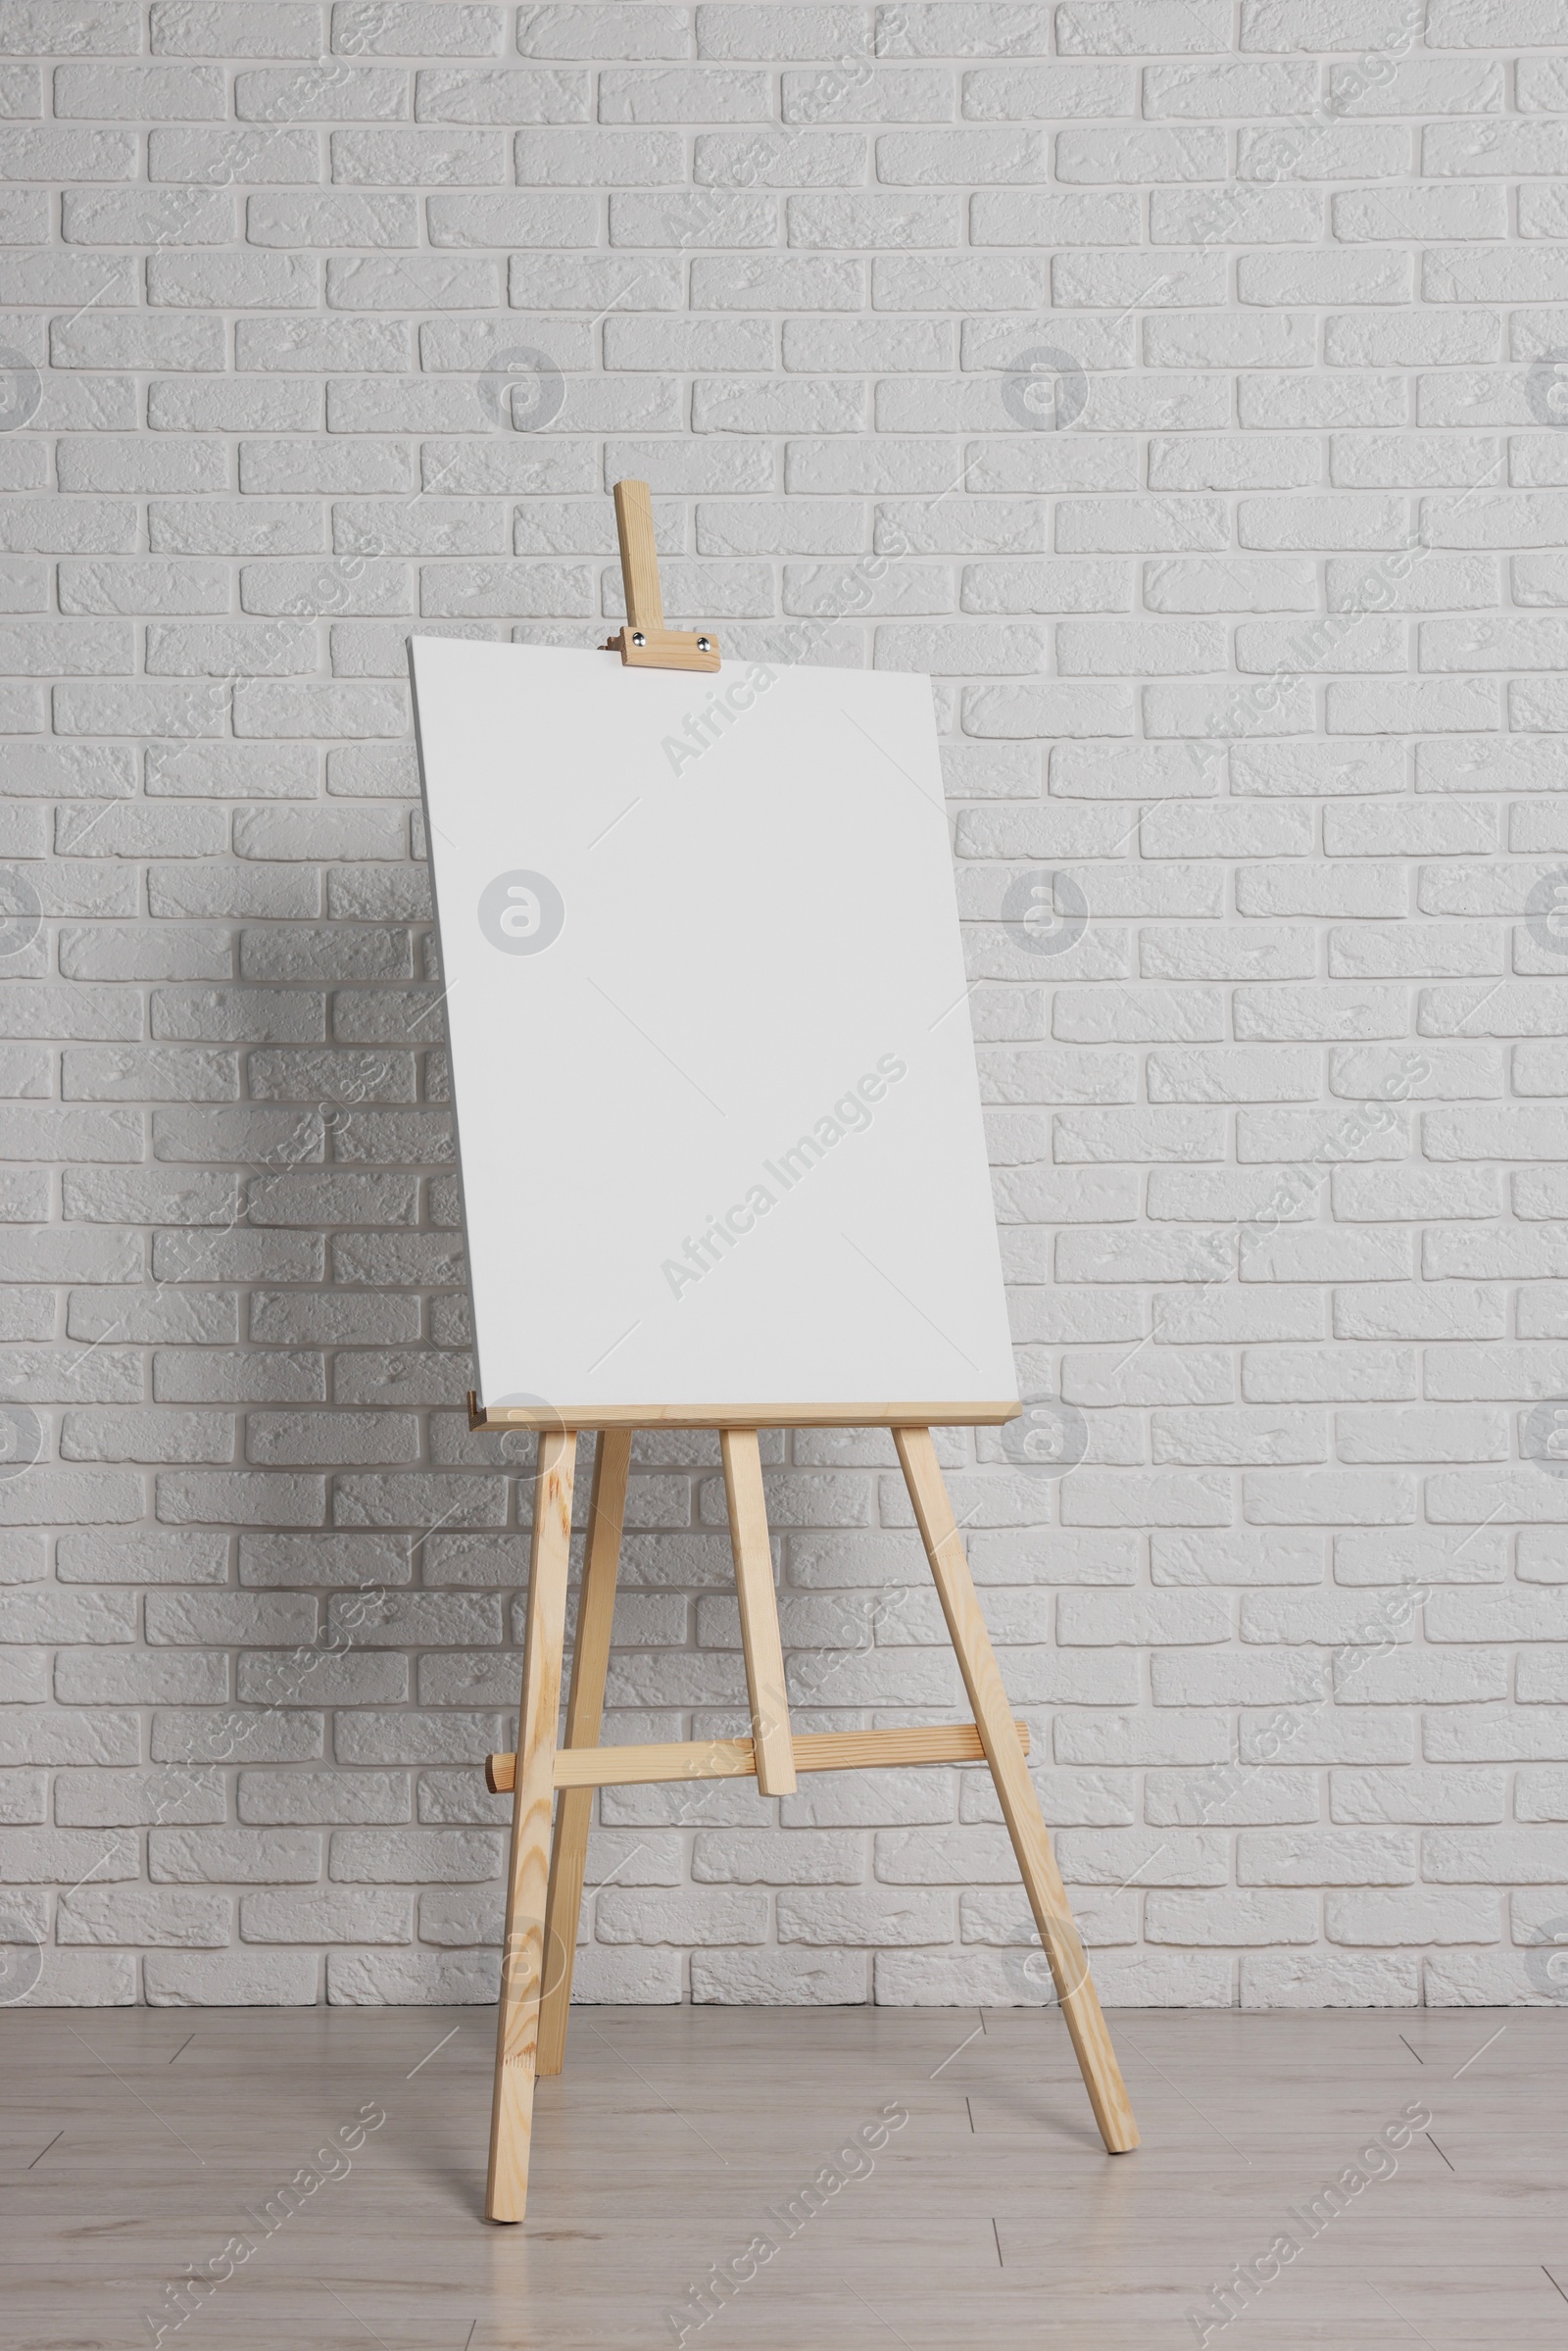 Photo of Wooden easel with blank canvas near white brick wall indoors